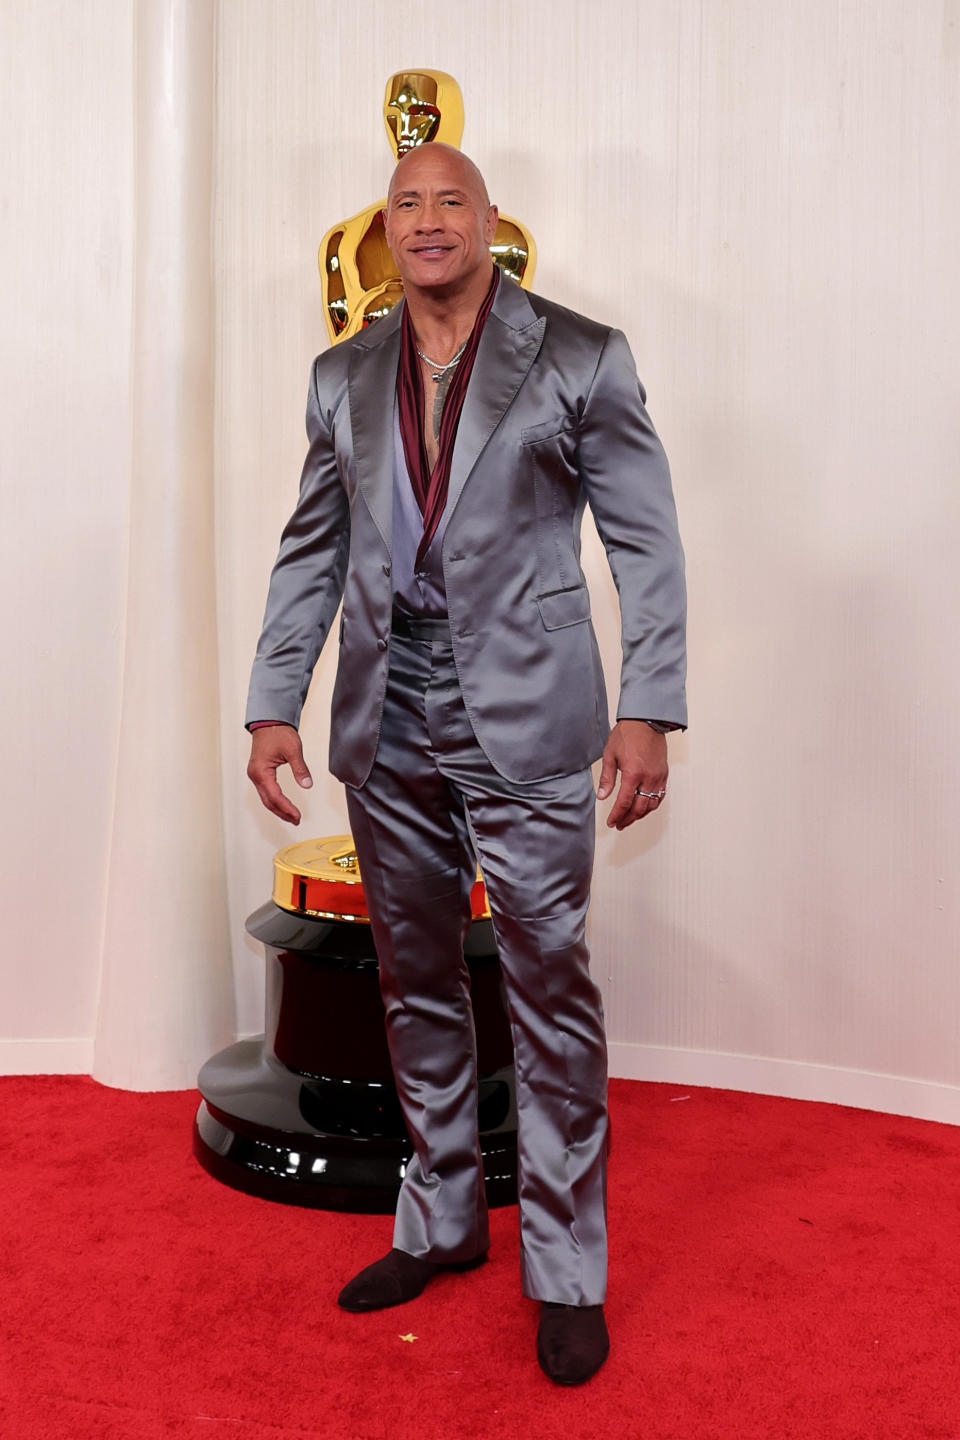 Dwayne Johnson didn't go with a regular tuxedo for the big night, instead rocking a grey outfit. Photo: Getty